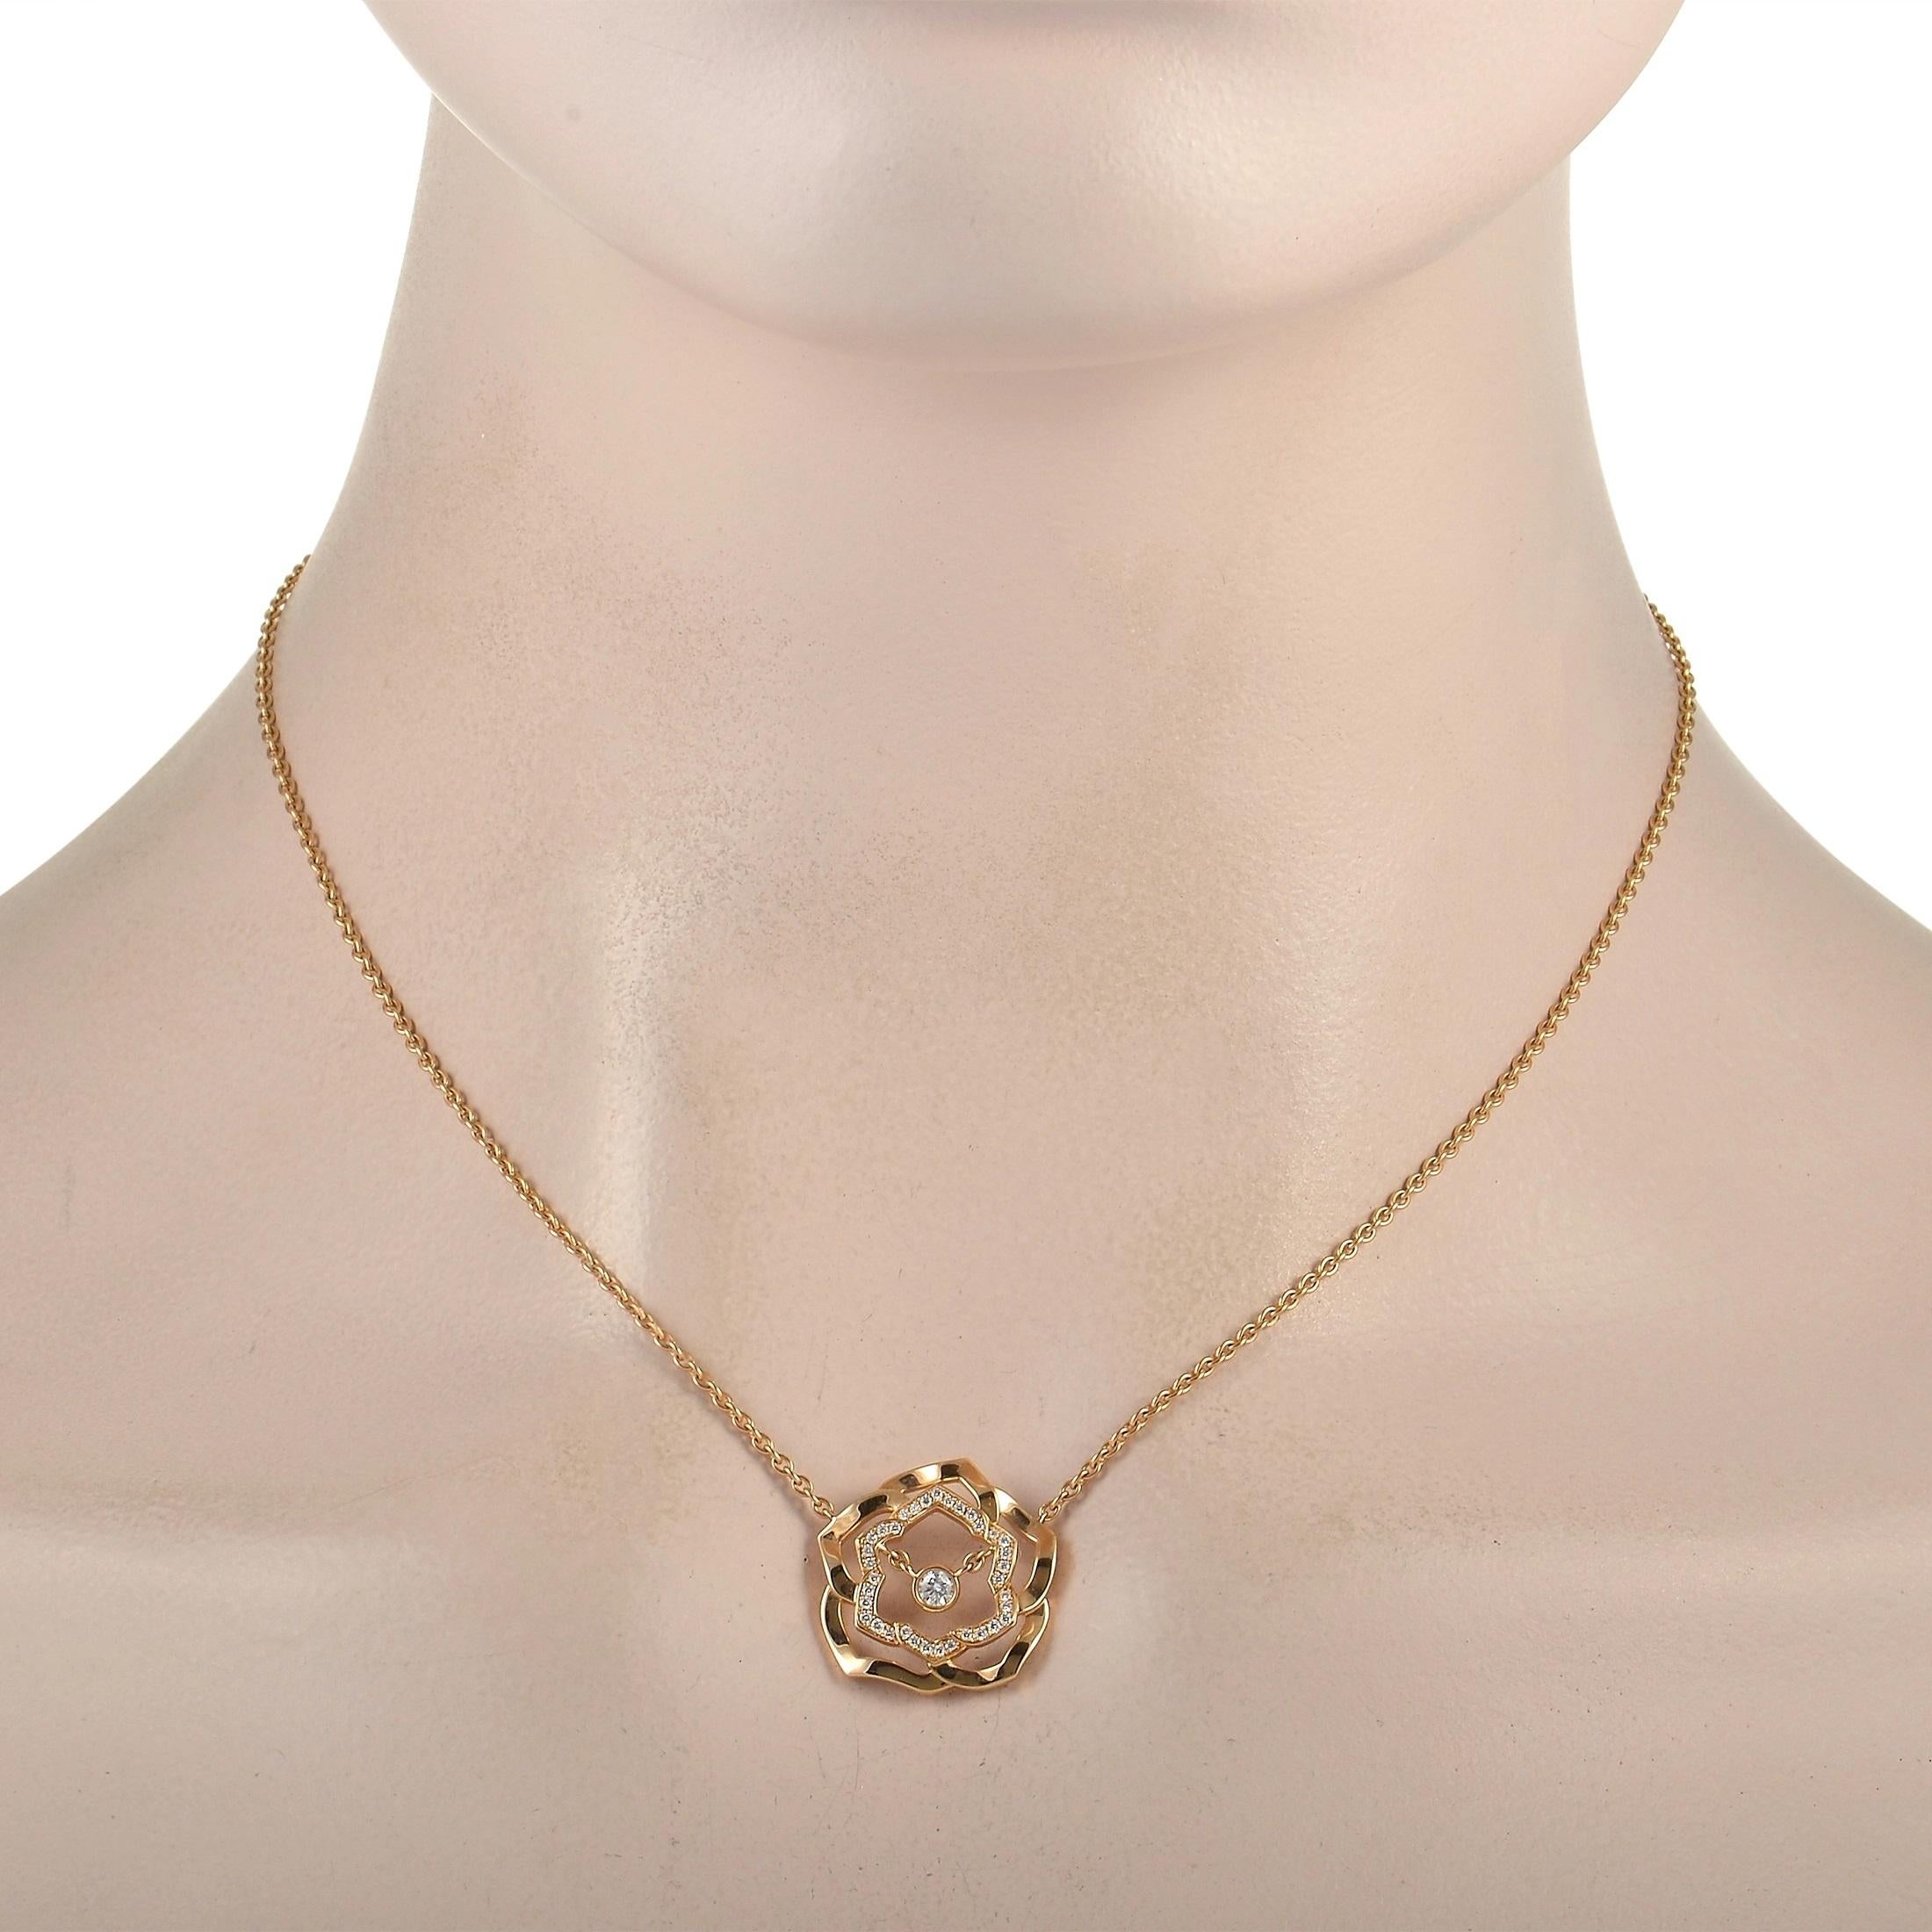 This Piaget pendant necklace has a captivating design that will forever impress. Suspended from a 16” chain, you’ll find a bold rose-shaped pendant that measures 0.75” round. This artistic piece of jewelry is even more elegant thanks to the